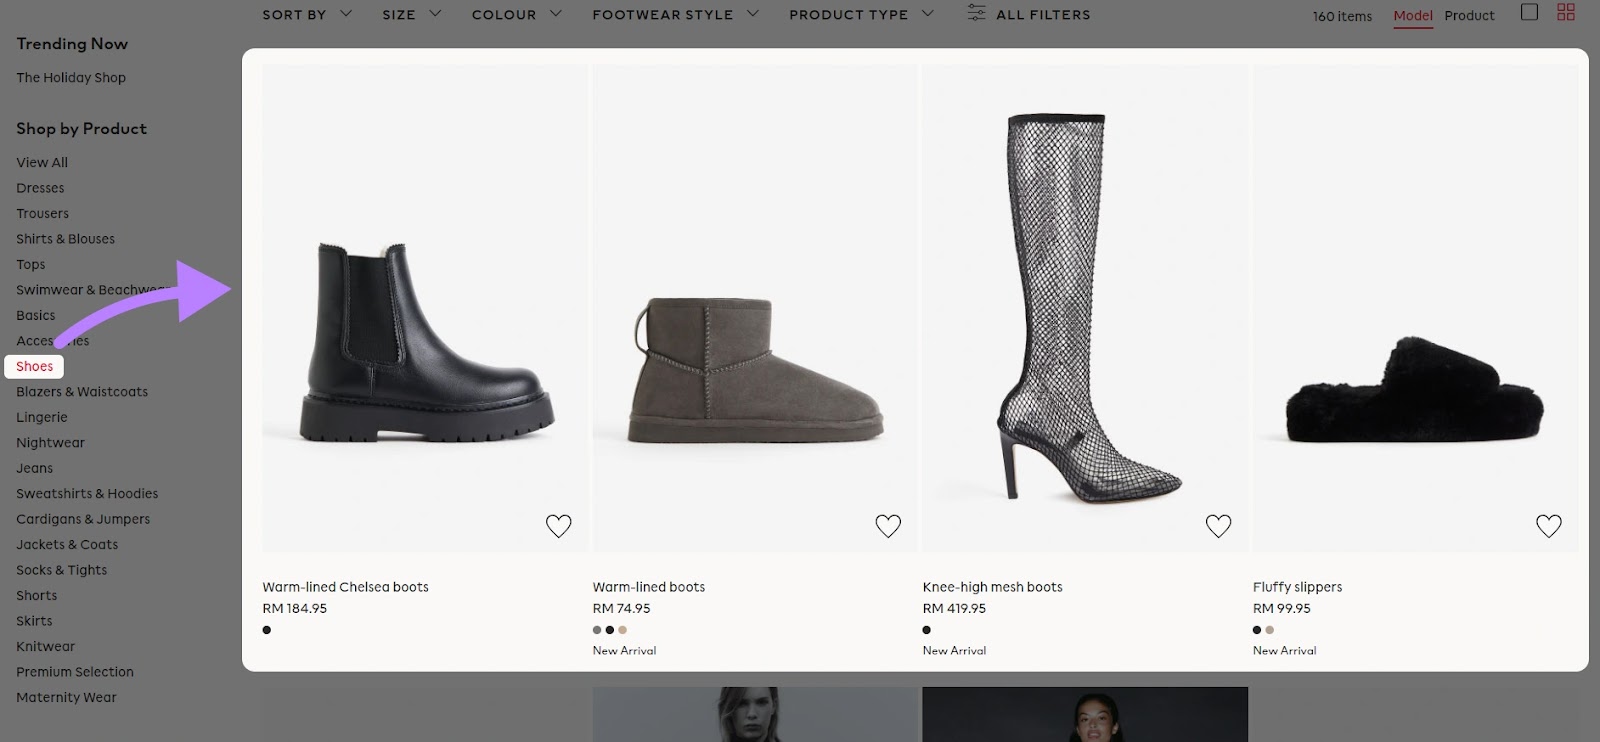 "Shoes" broad category showcases all different types of shoes on a site